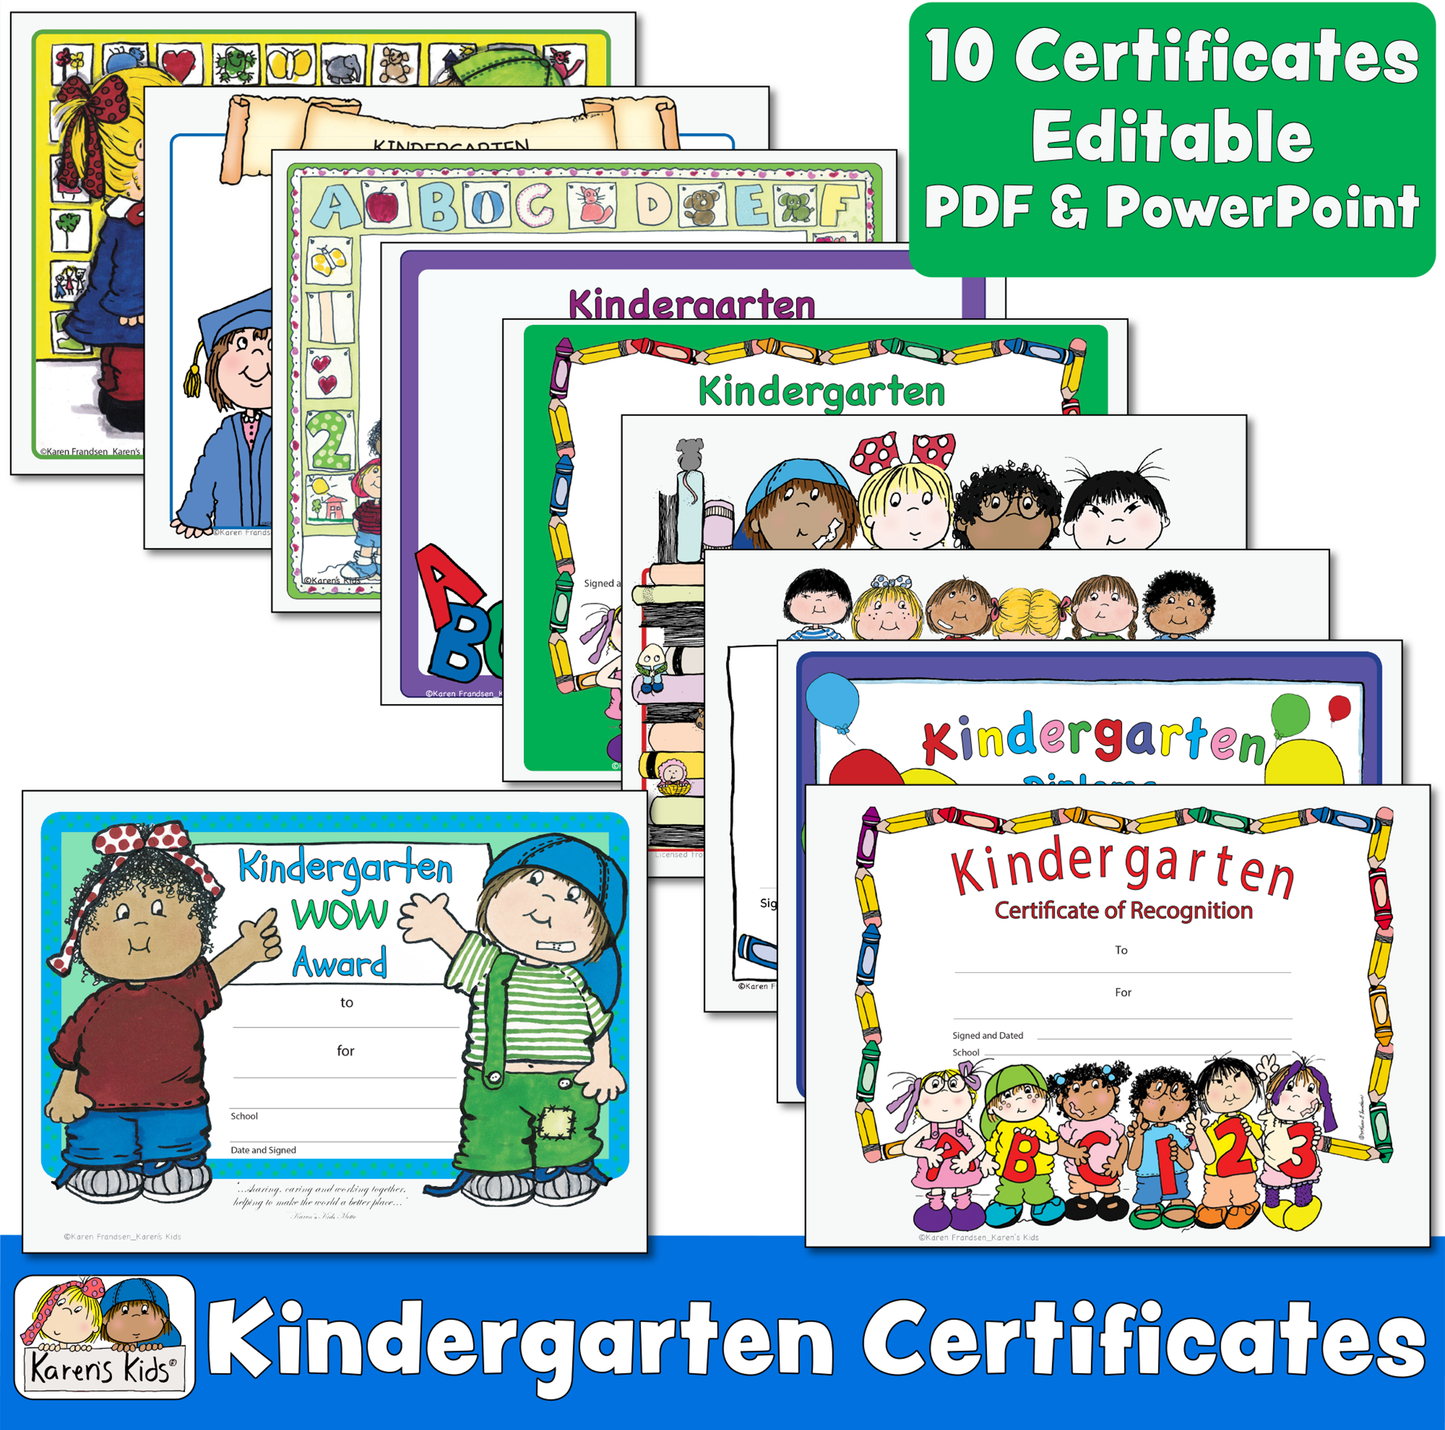 Kindergarten certificates in full color. 10 unique, cute PDF and PowerPoint editable printable designs showing.